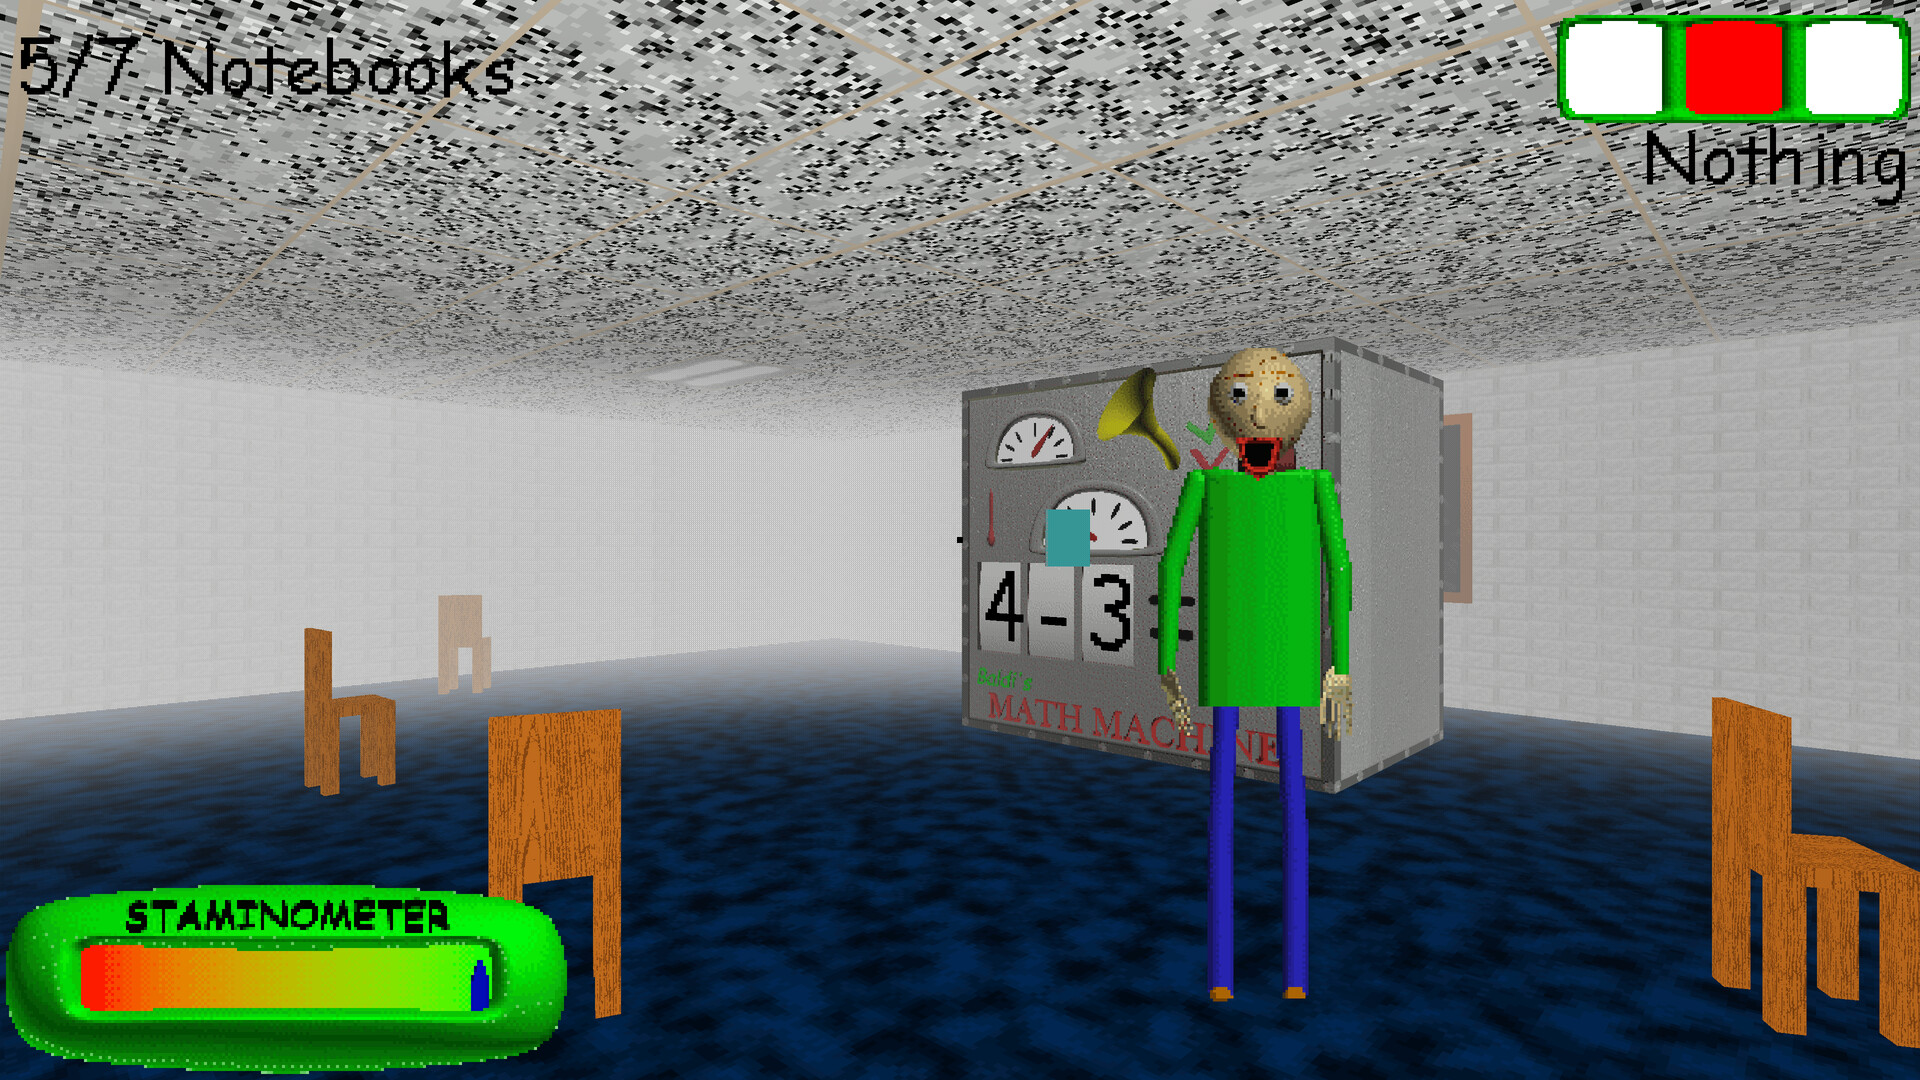 Steam Community :: Guide :: An Overview Guide of Baldi's Basics+